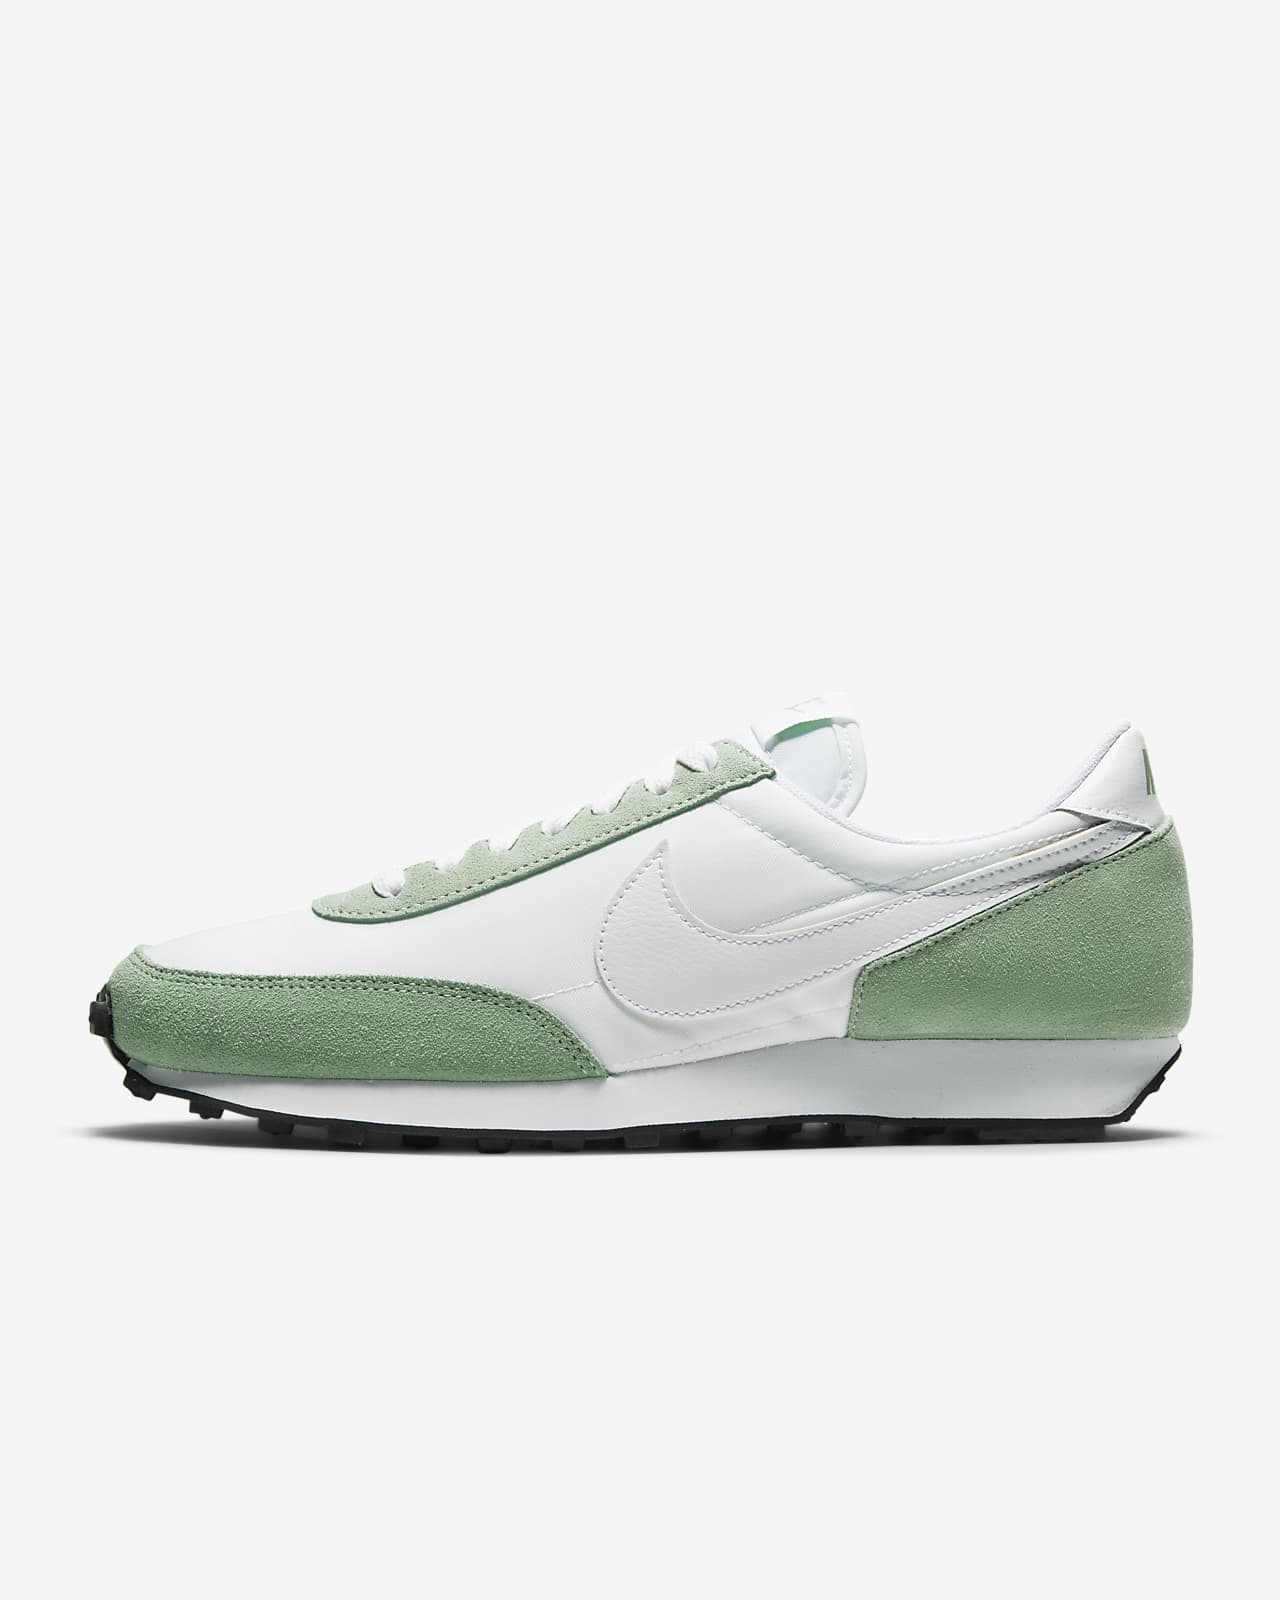 womens green and black nike shoes